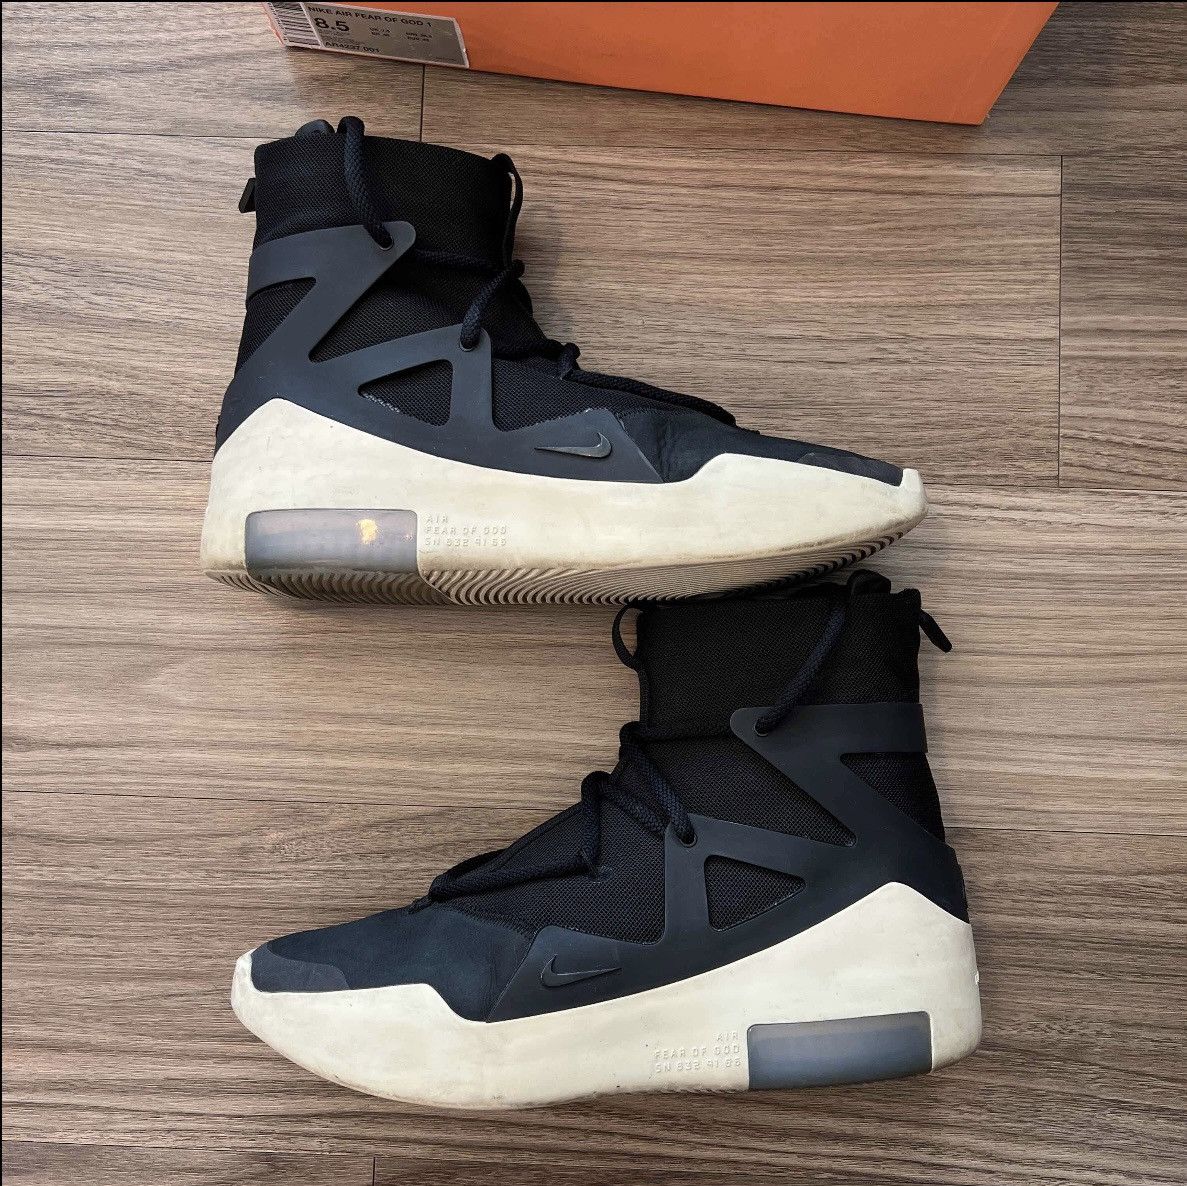 Nike Air Fear Of God “Black” Size US 8.5 / EU 41-42 - 1 Preview